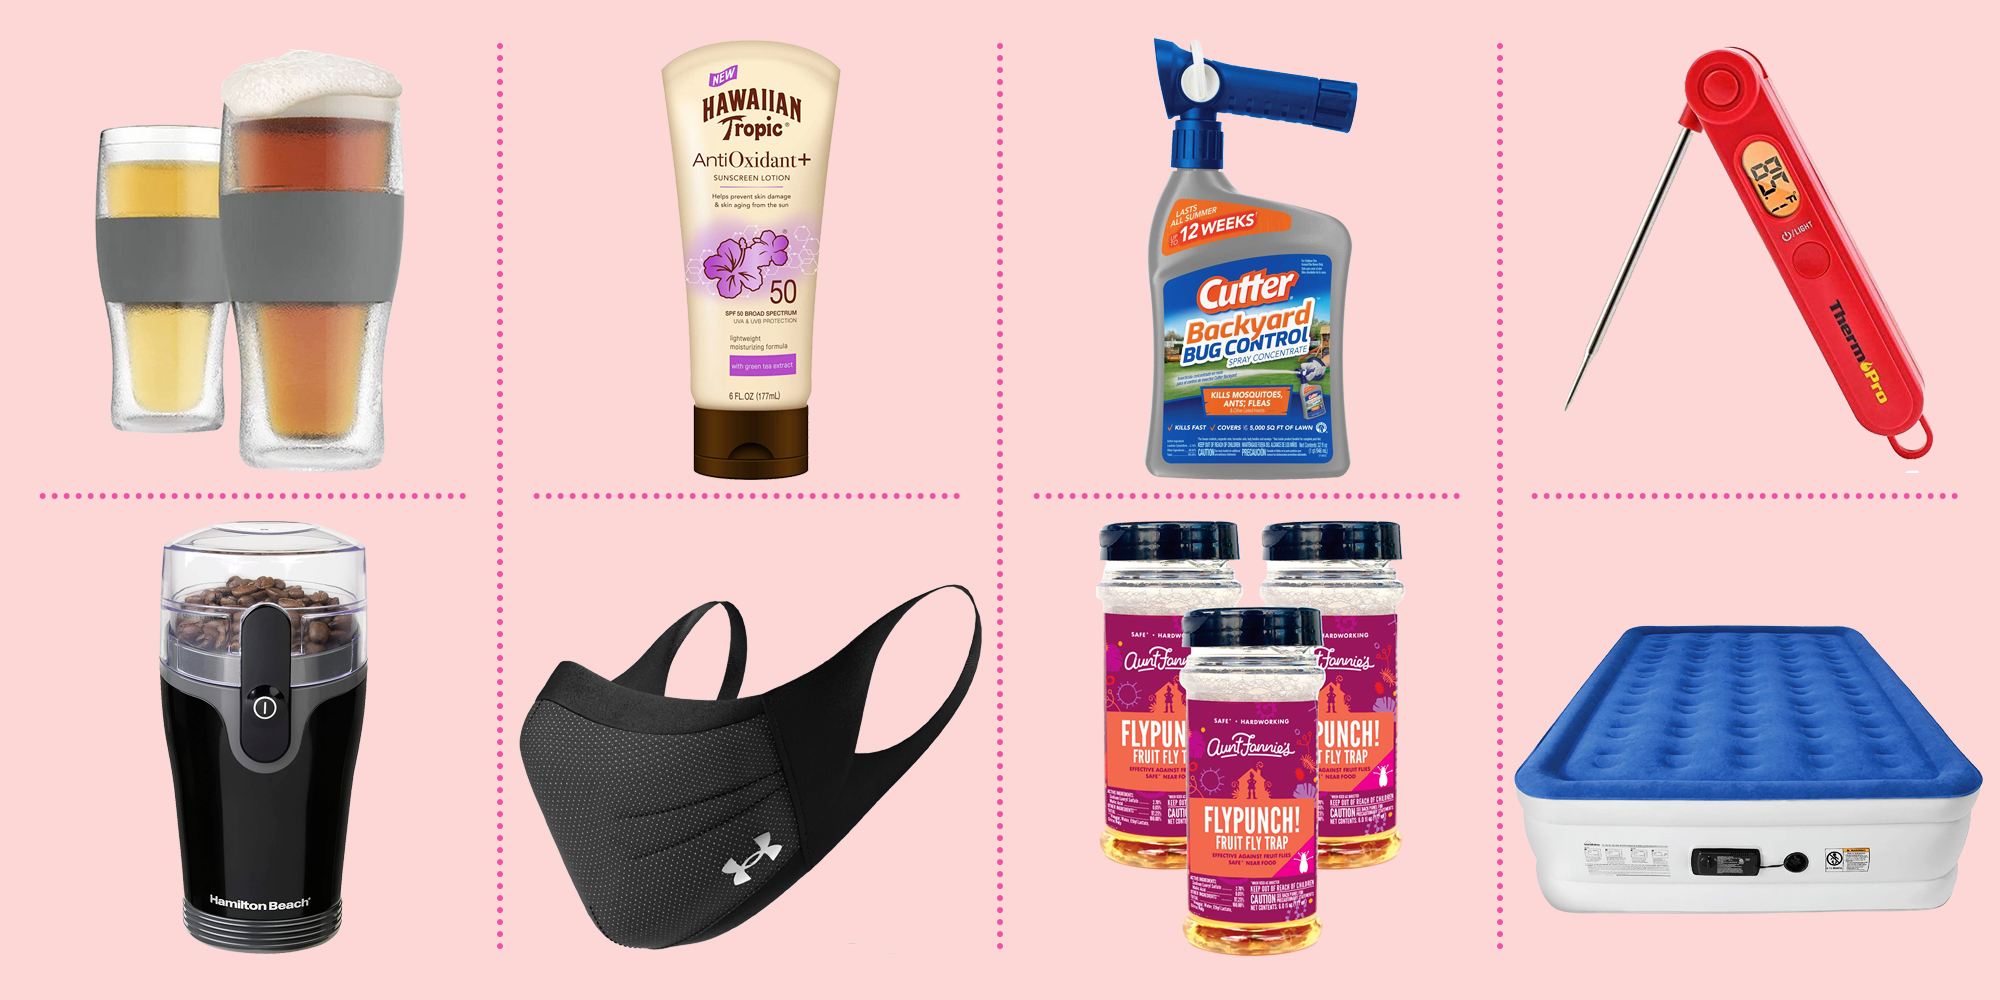 https://hips.hearstapps.com/hmg-prod/images/gh-070620-most-popular-products-june-1594140246.png